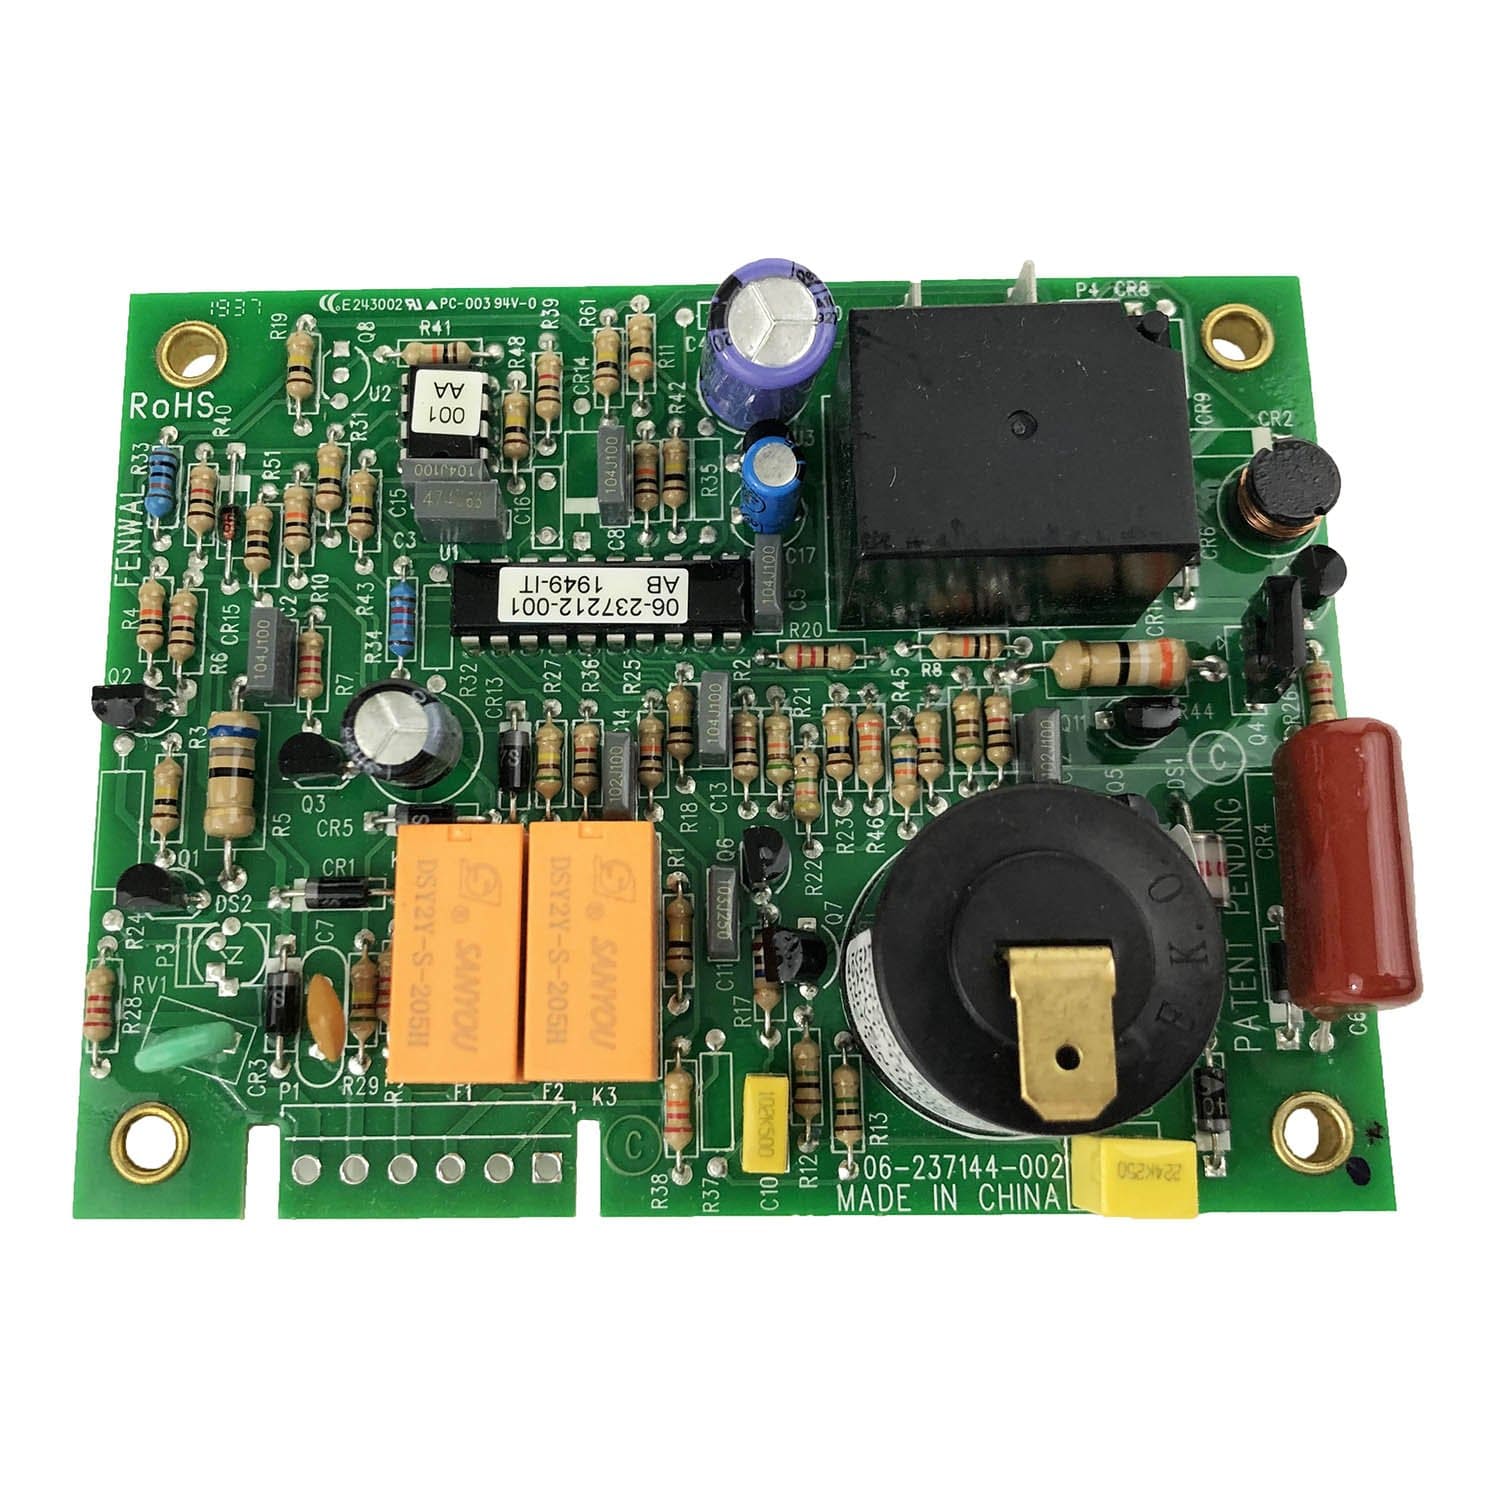 NBK Parts 20210 Furnace Control Board Replaces OEM Part Number Sb521099